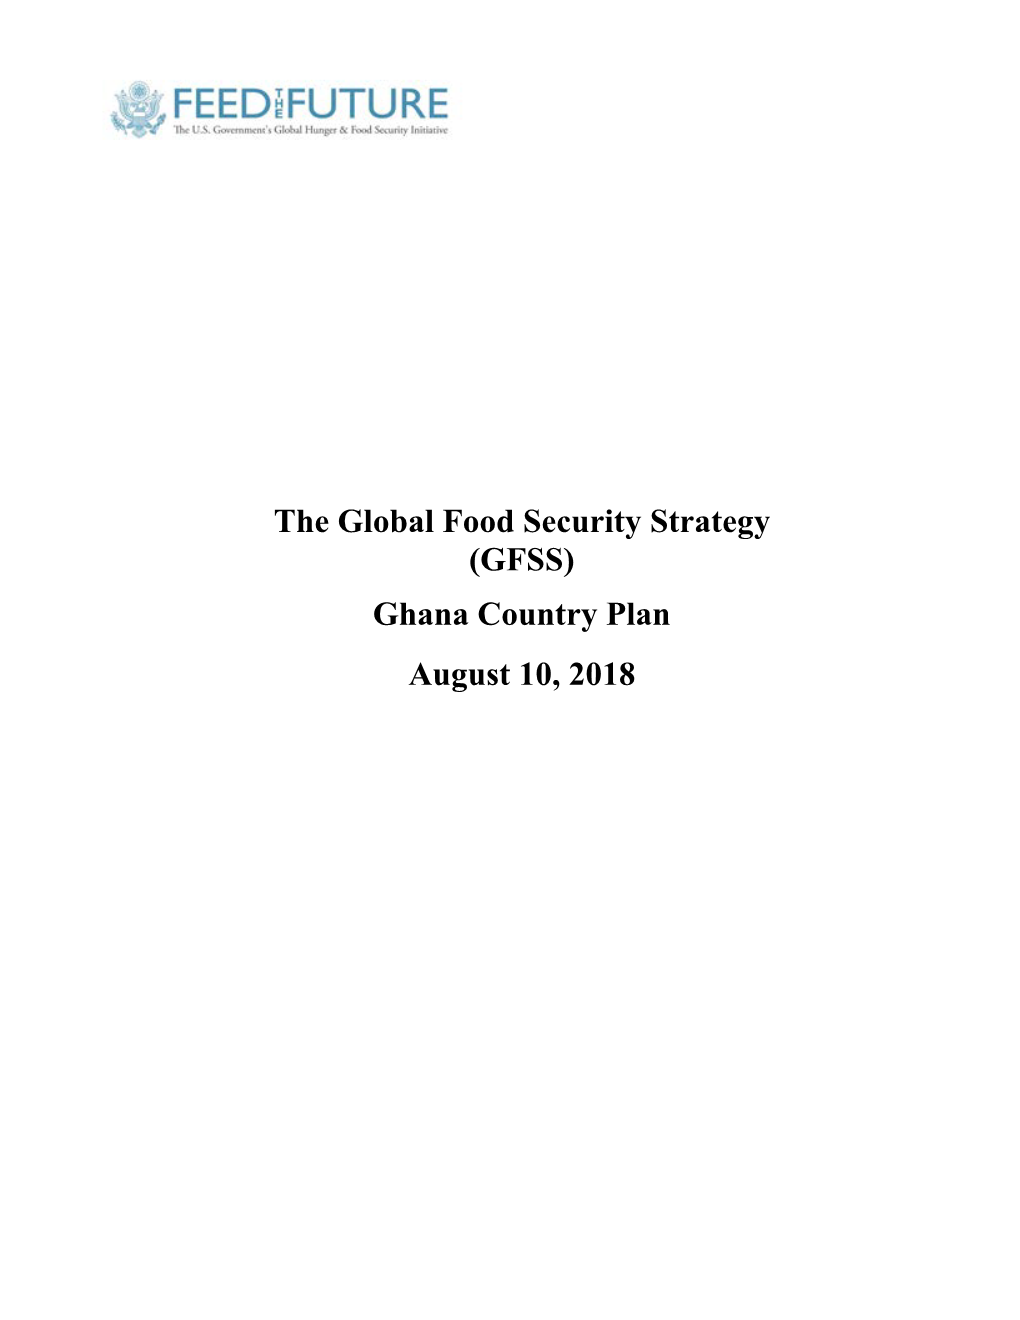 The Global Food Security Strategy (GFSS) Ghana Country Plan August 10, 2018